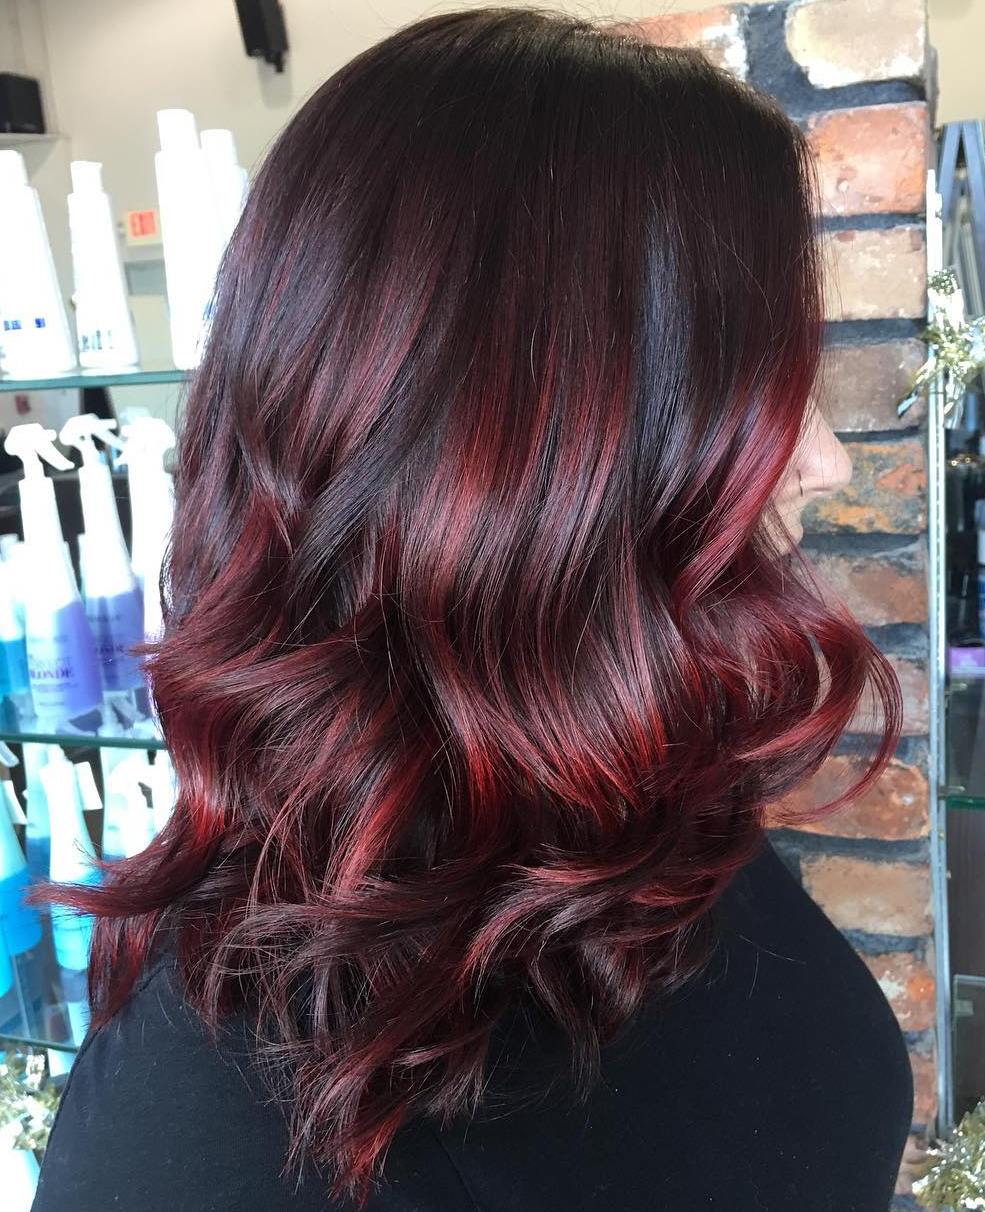 Bright Burgundy Hair with Layers